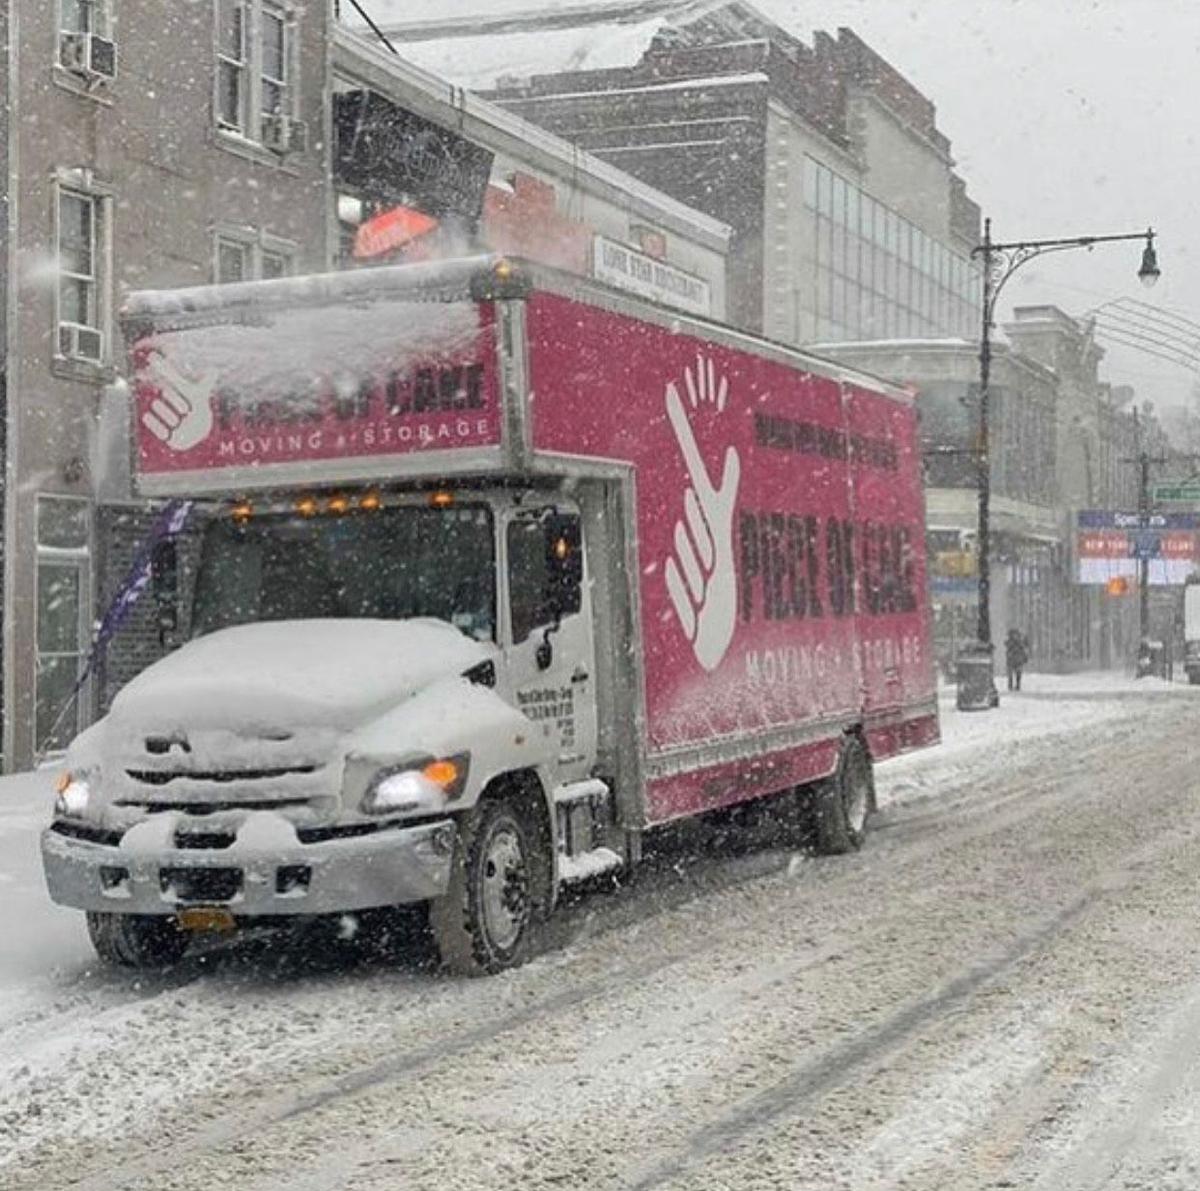 A moving van at work in New York City in the snow. (Courtesy of Piece of Cake Moving & Storage, NY)